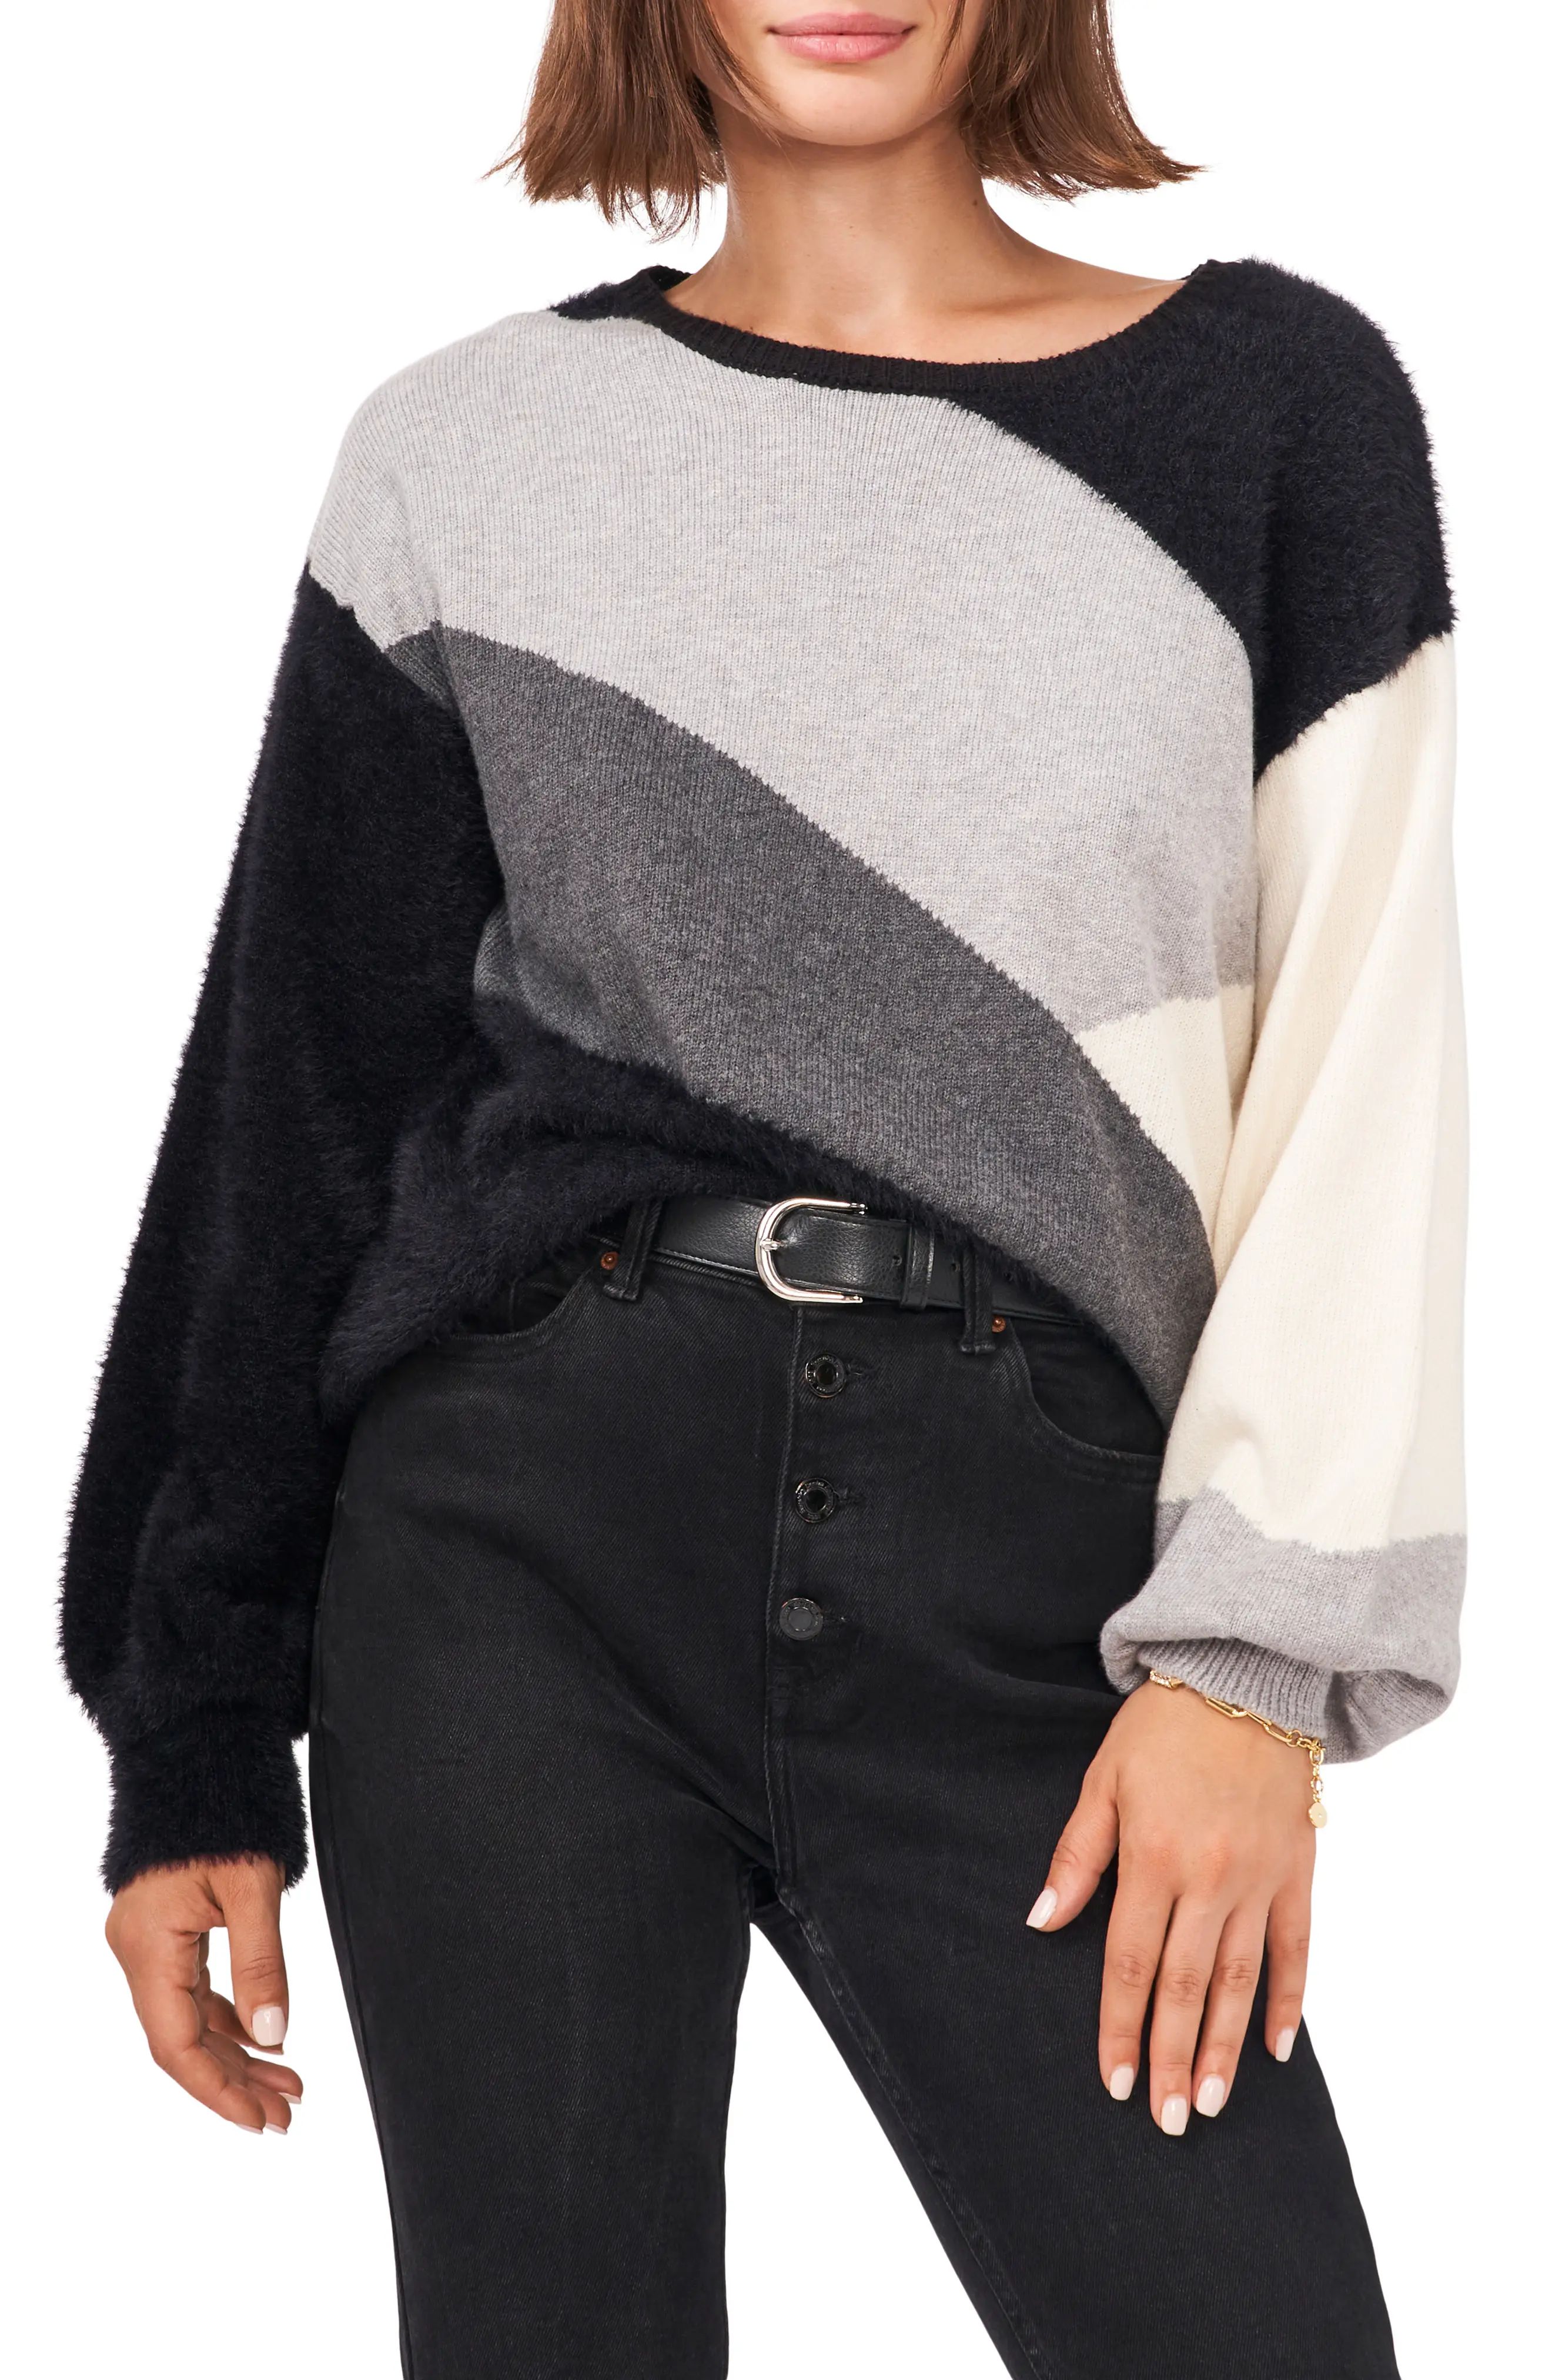 Vince Camuto Eyelash Colorblock Sweater in Light Heather Grey at Nordstrom, Size Xx-Large | Nordstrom